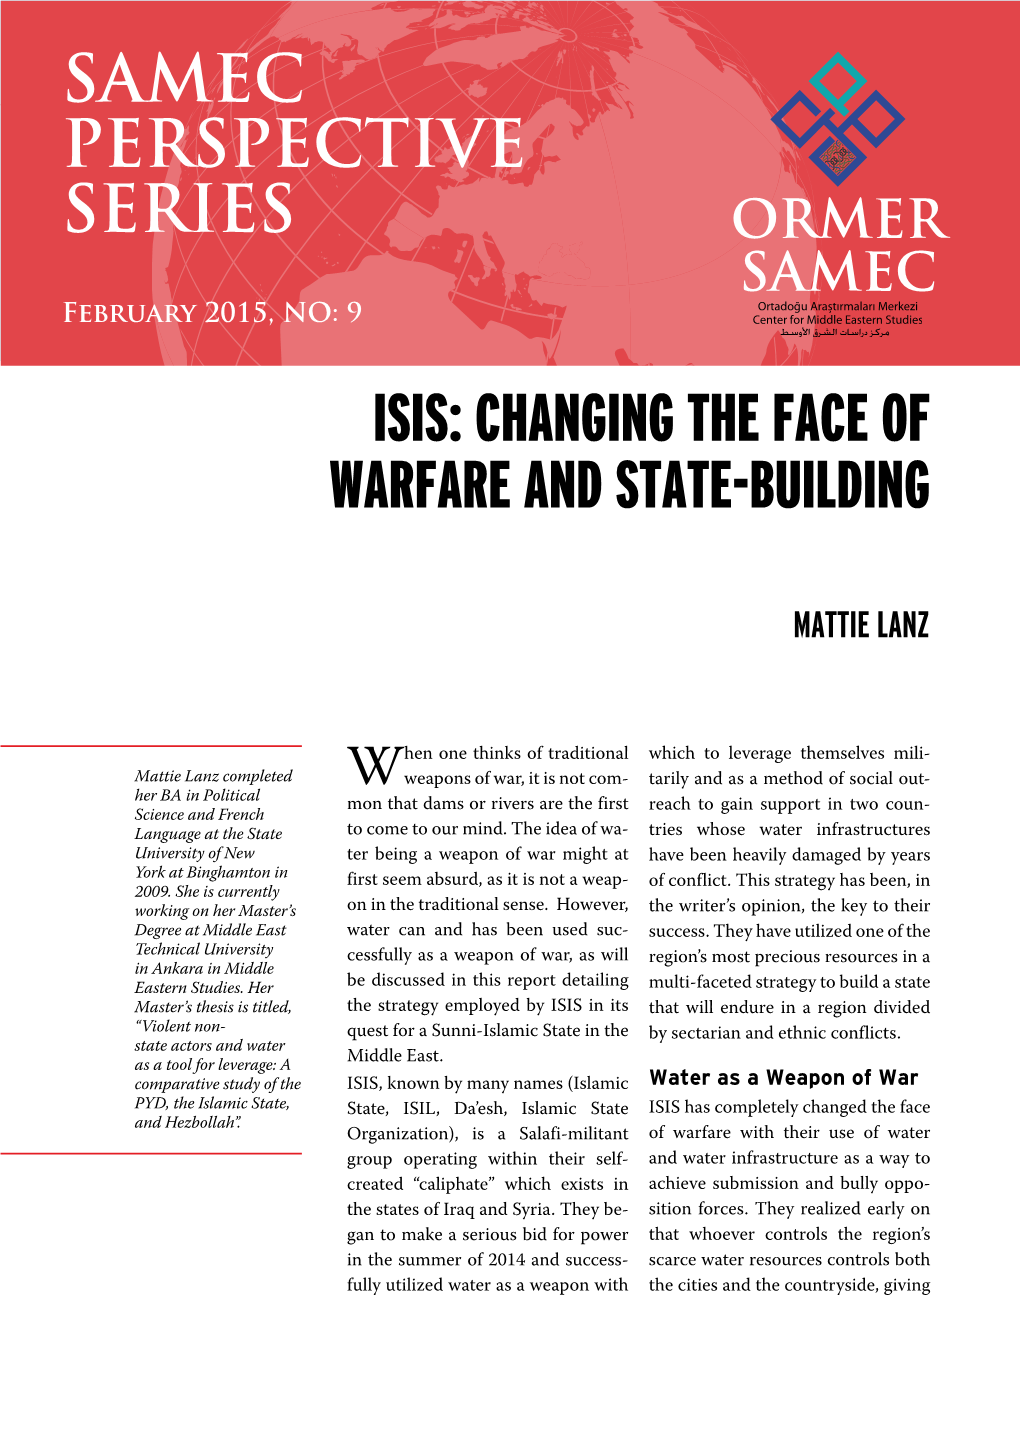 ISIS: Changing the Face of Warfare and State-Building